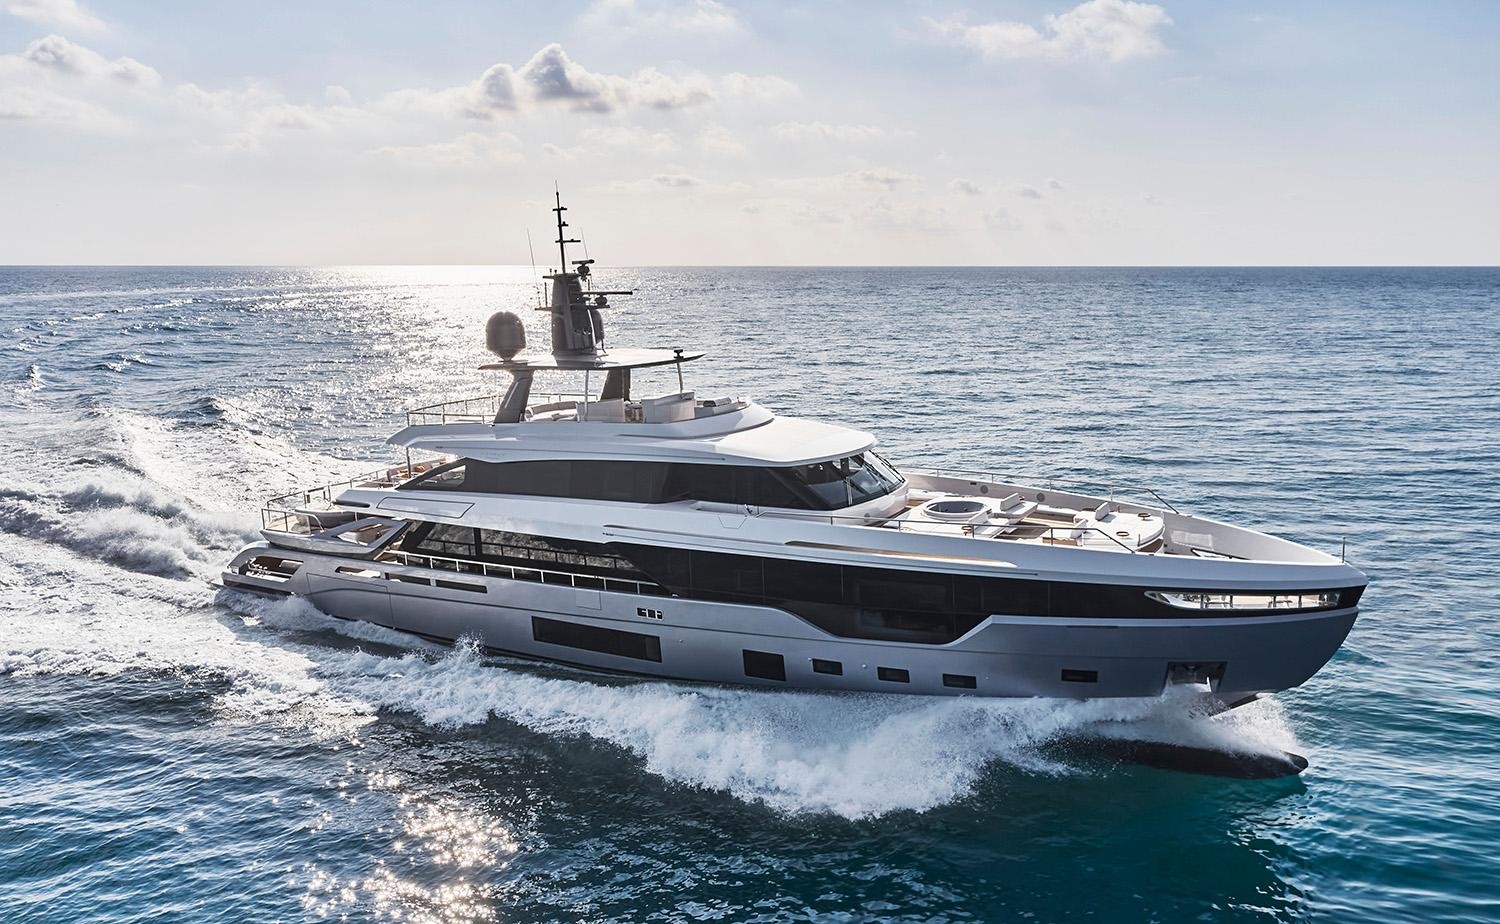 Azimut Yachts will be attending the Monaco Yacht Show 2021